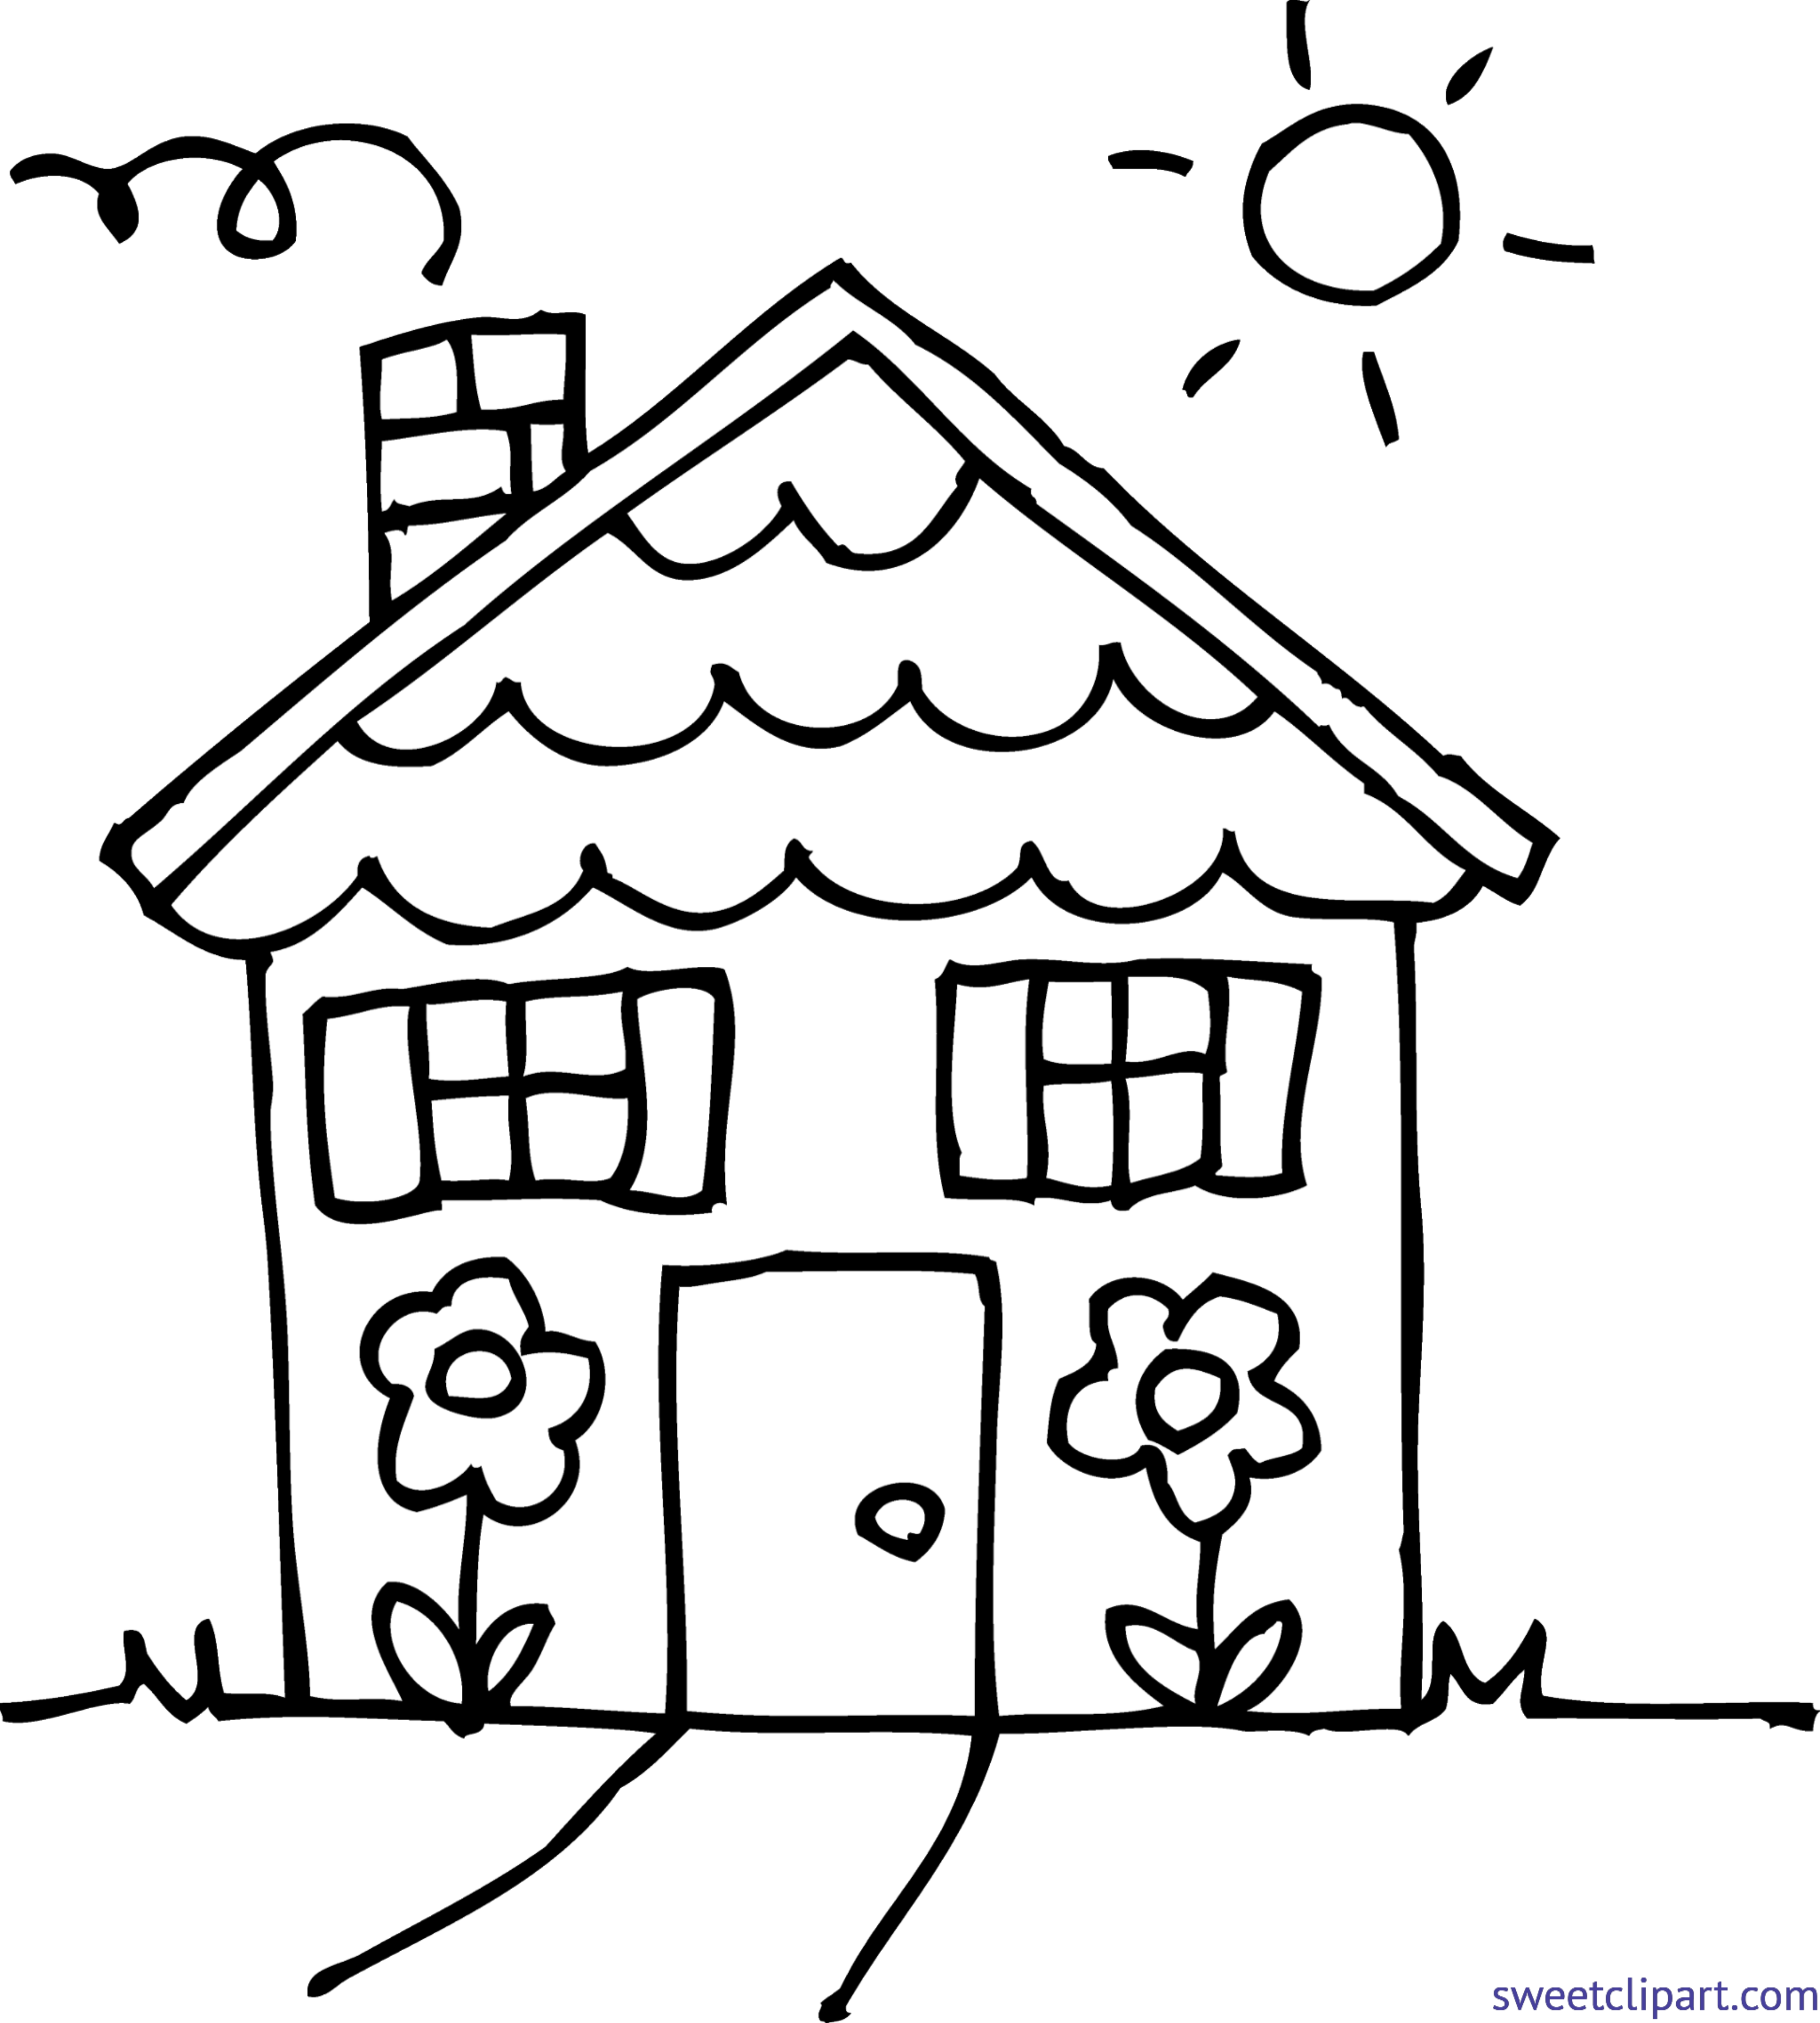 Mansion clipart easy draw. House line drawing clip